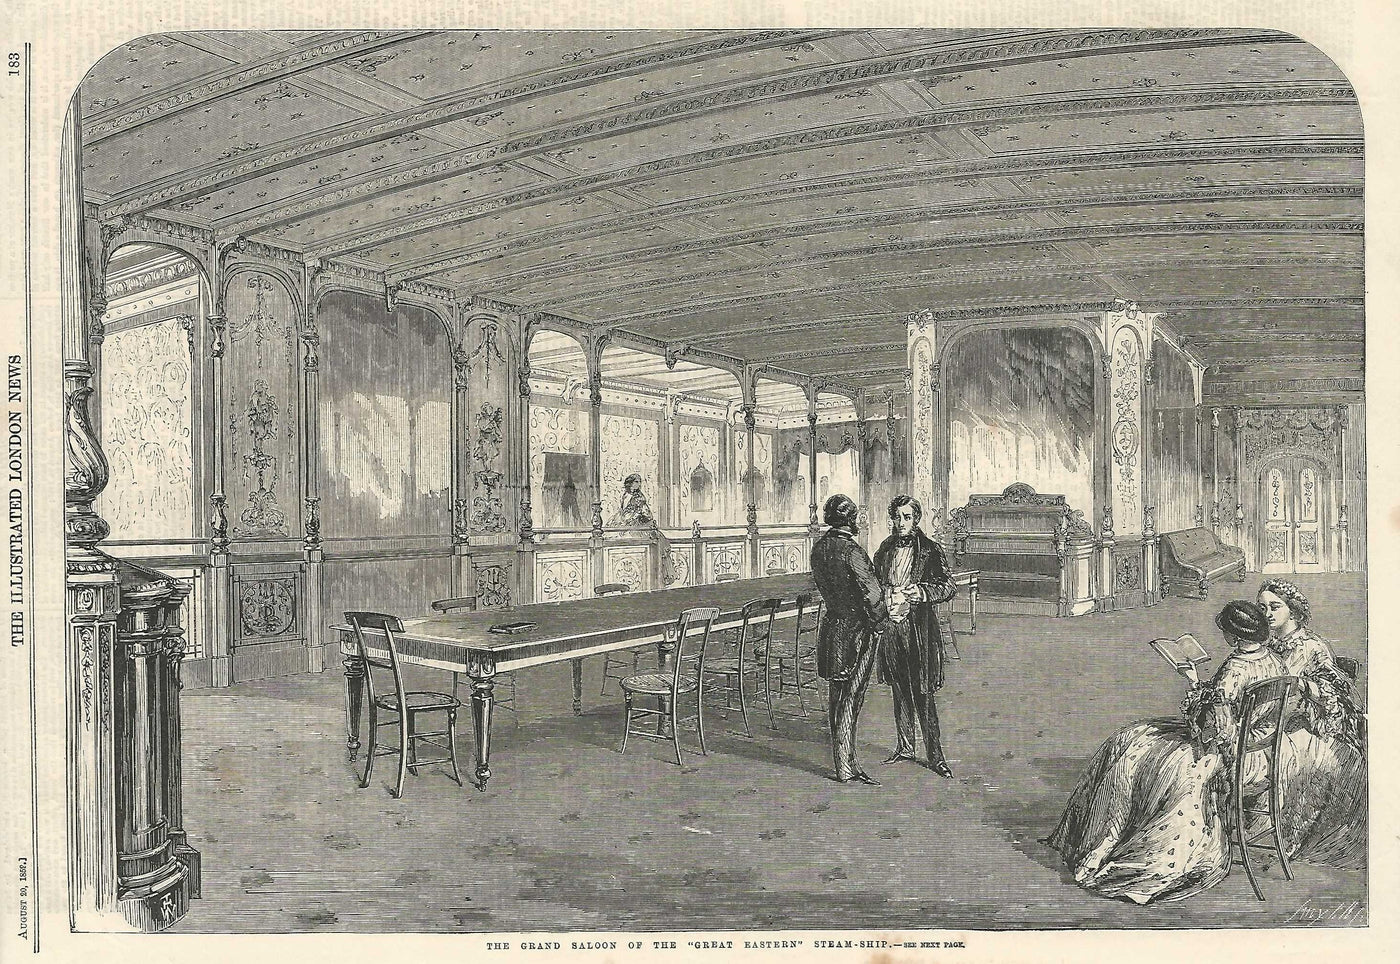 Great Eastern steamship's 'grand saloon' antique print 1859